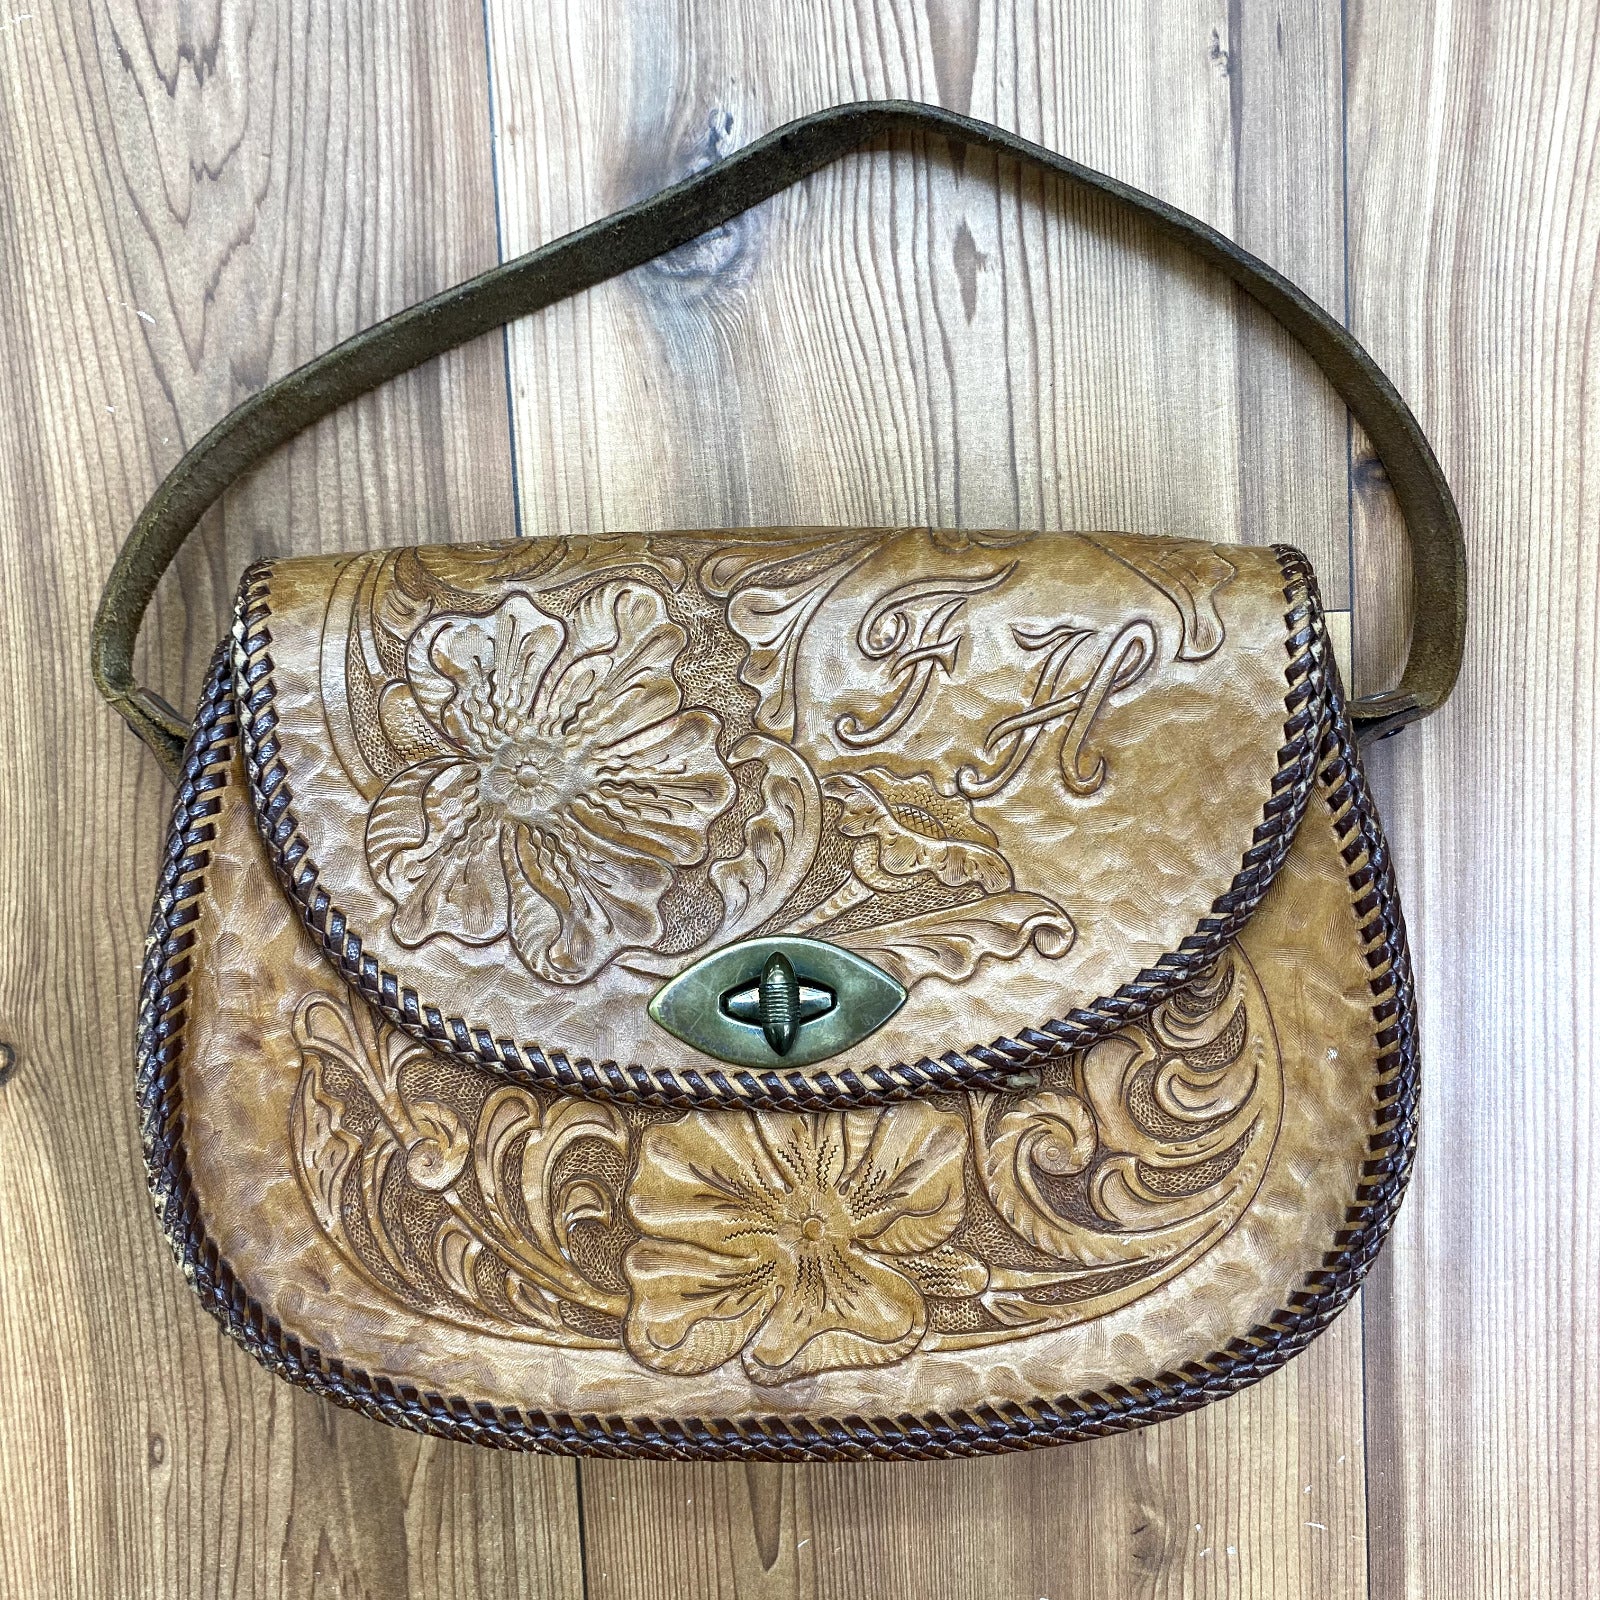 Handmade Light Brown Tooled Leather Initals 'FH' Clutch Purse